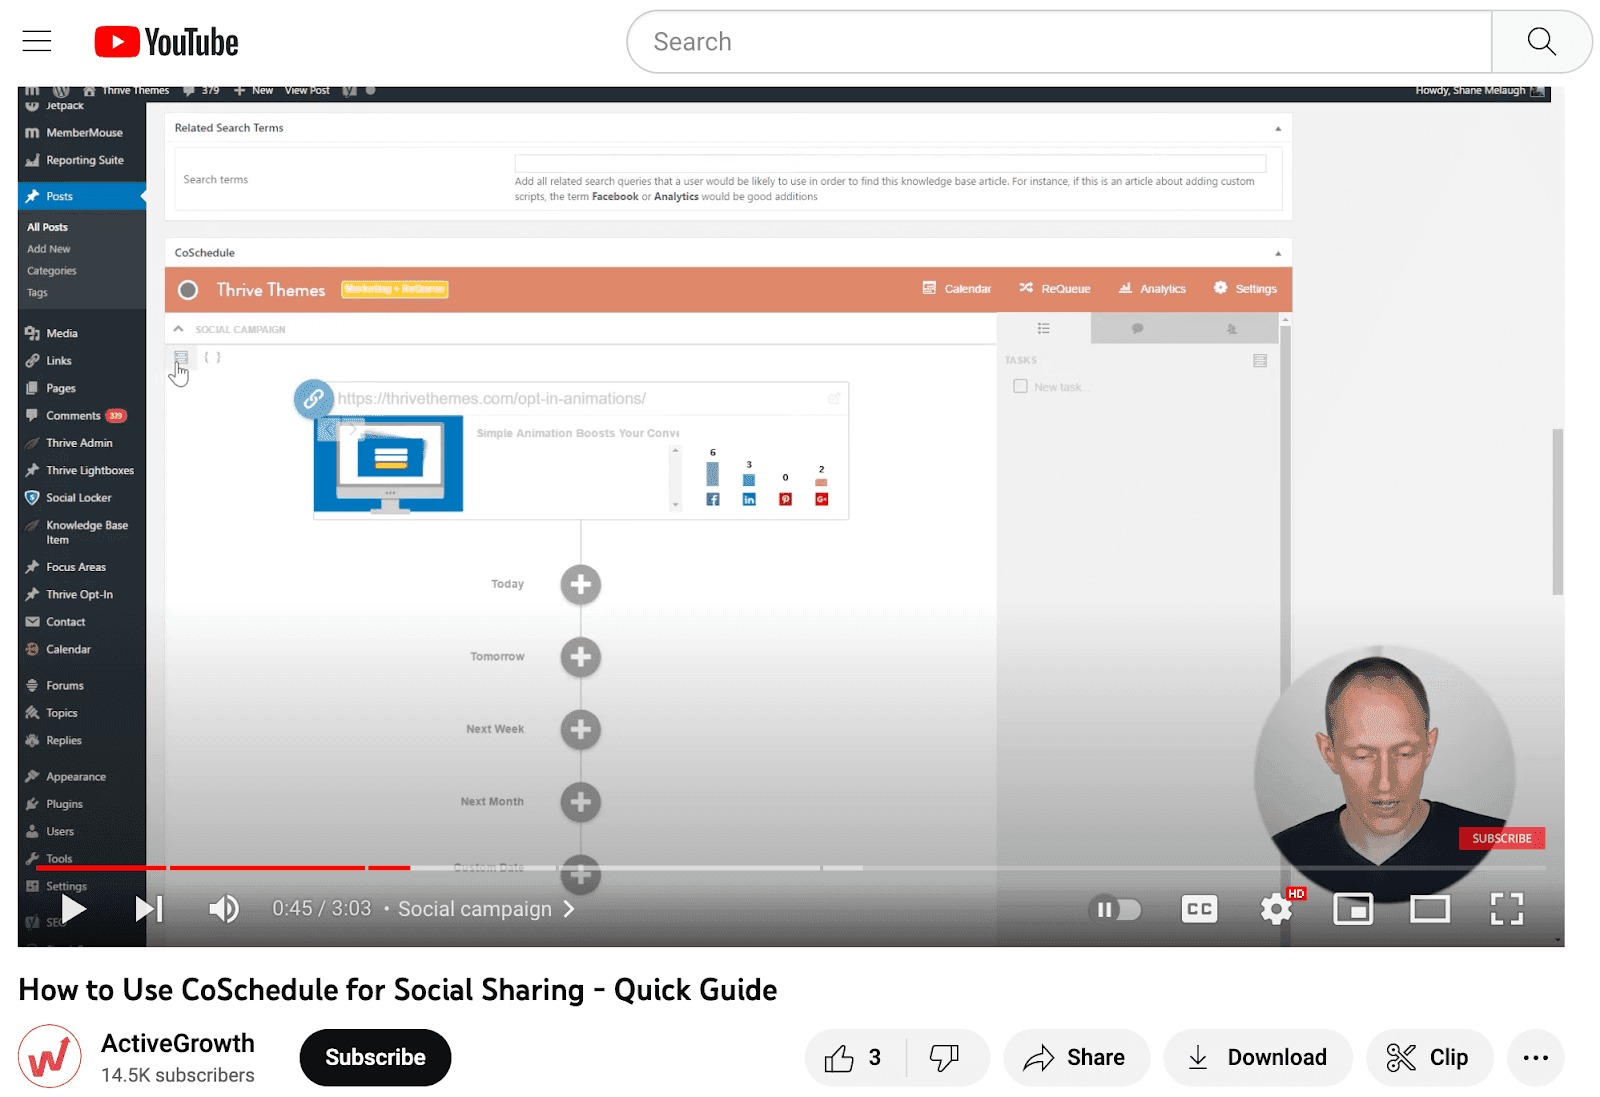 Screenshot of a Youtube video of a tutorial on how to use CoSchedule for Social Sharing.